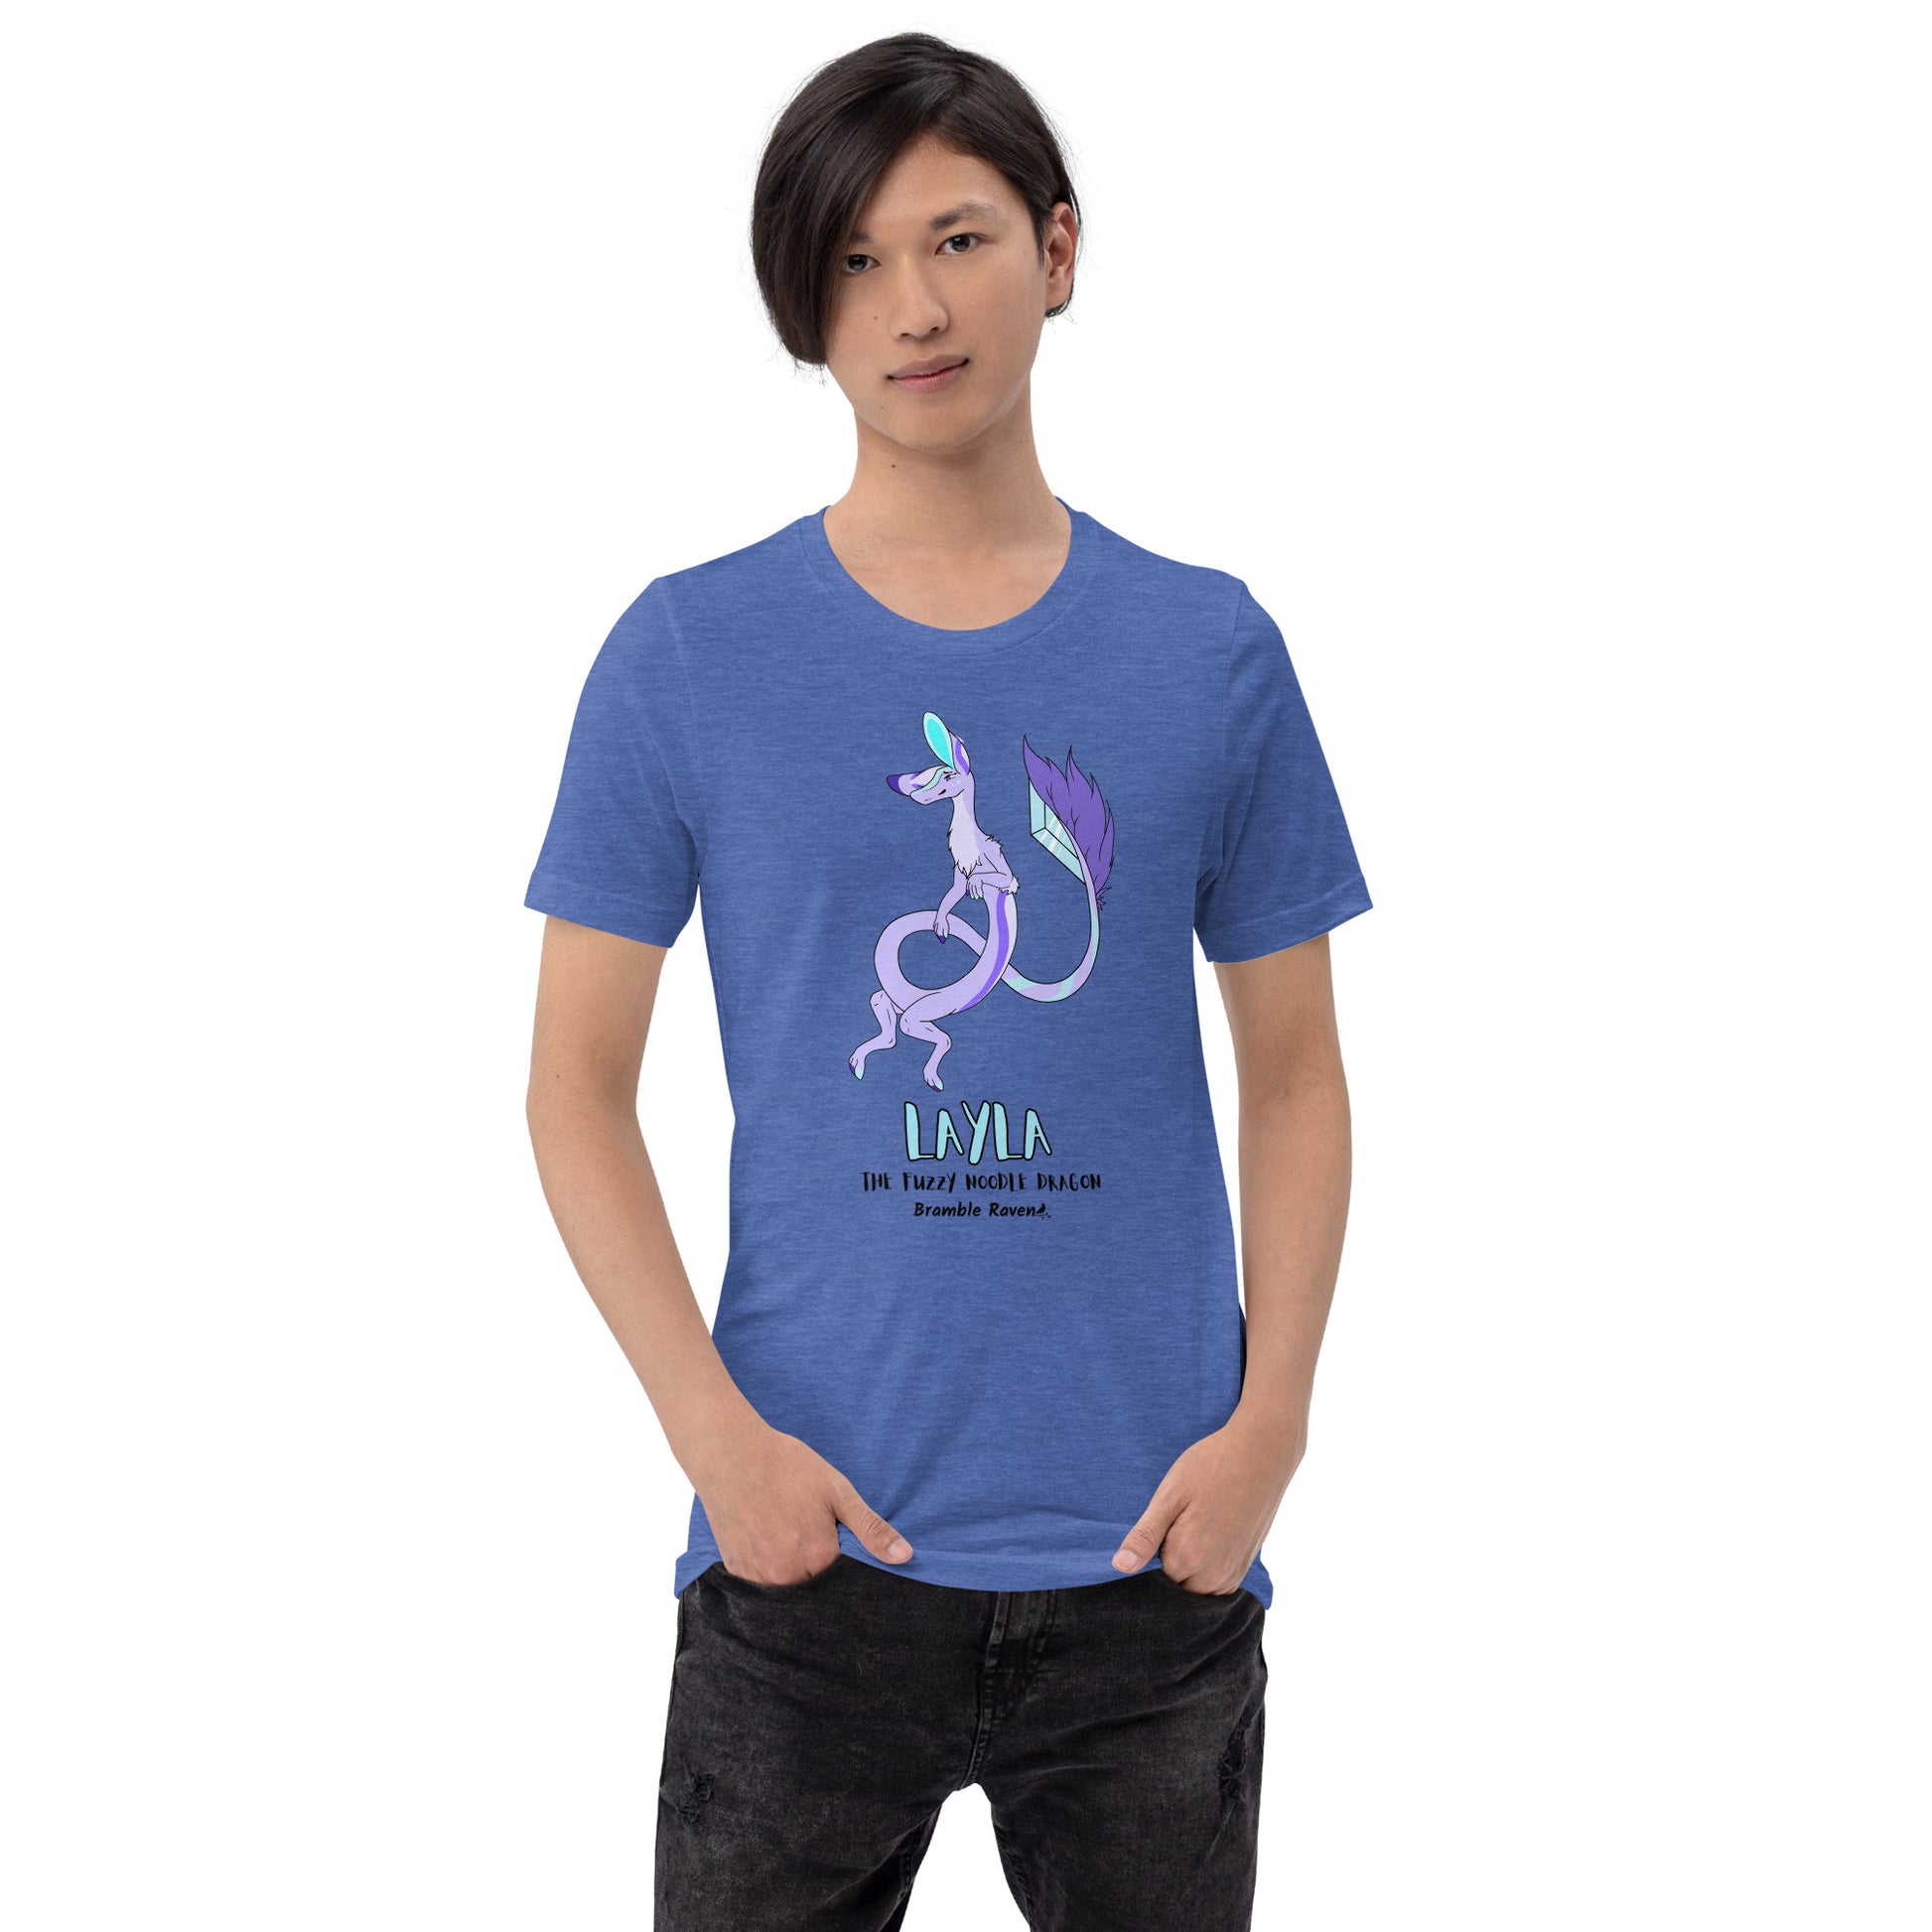 Layla the Fuzzy Noodle Dragon on a heather true royal blue unisex t-shirt. Shown on a male model.